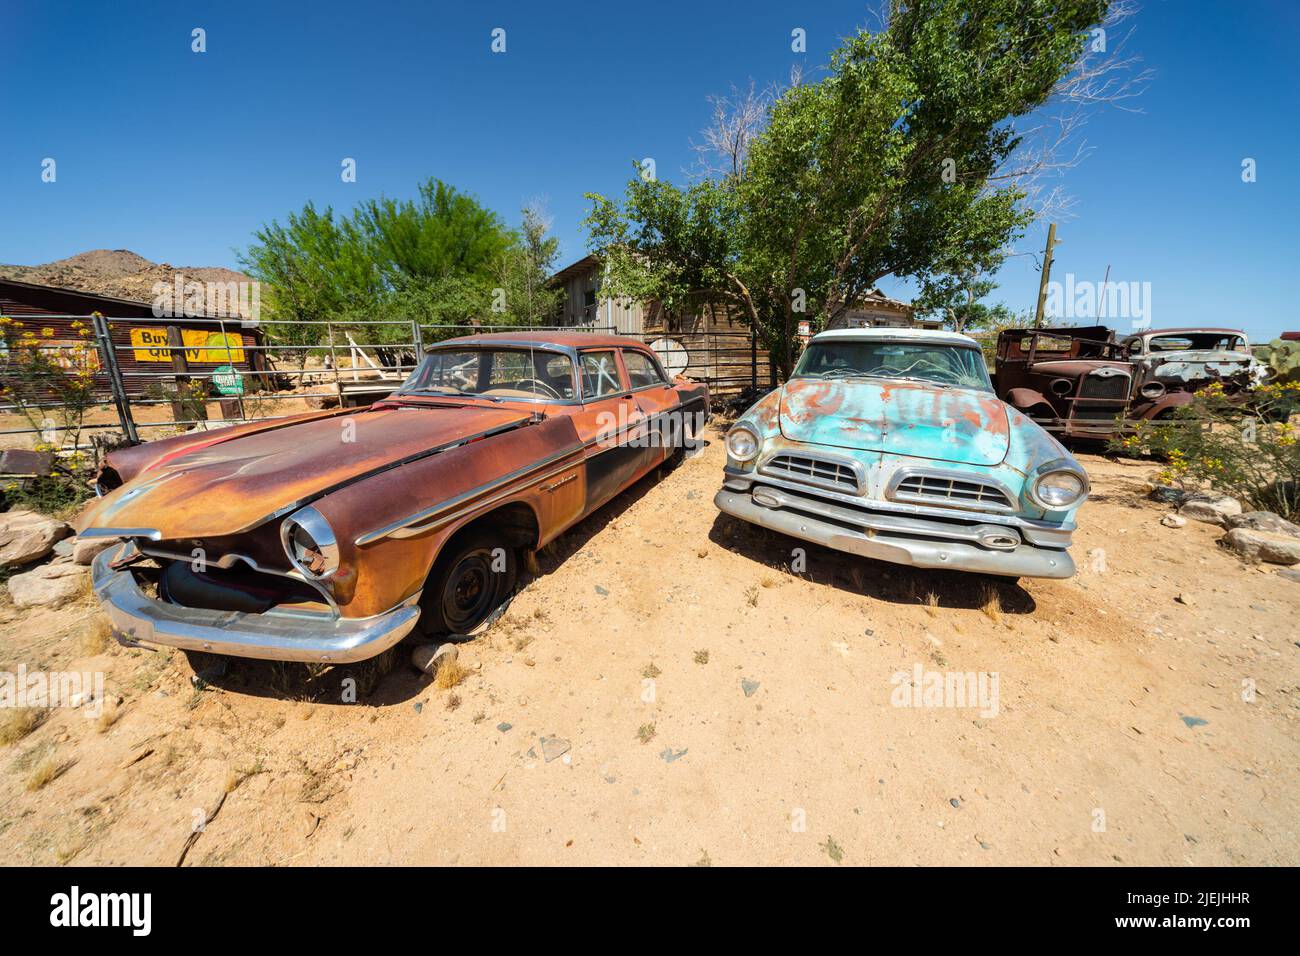 Desoto Firedome and rusty blue Chrysler car at Hackberry General Store, Hackberry, AZ, USA. Route 66 Arizona Stock Photo